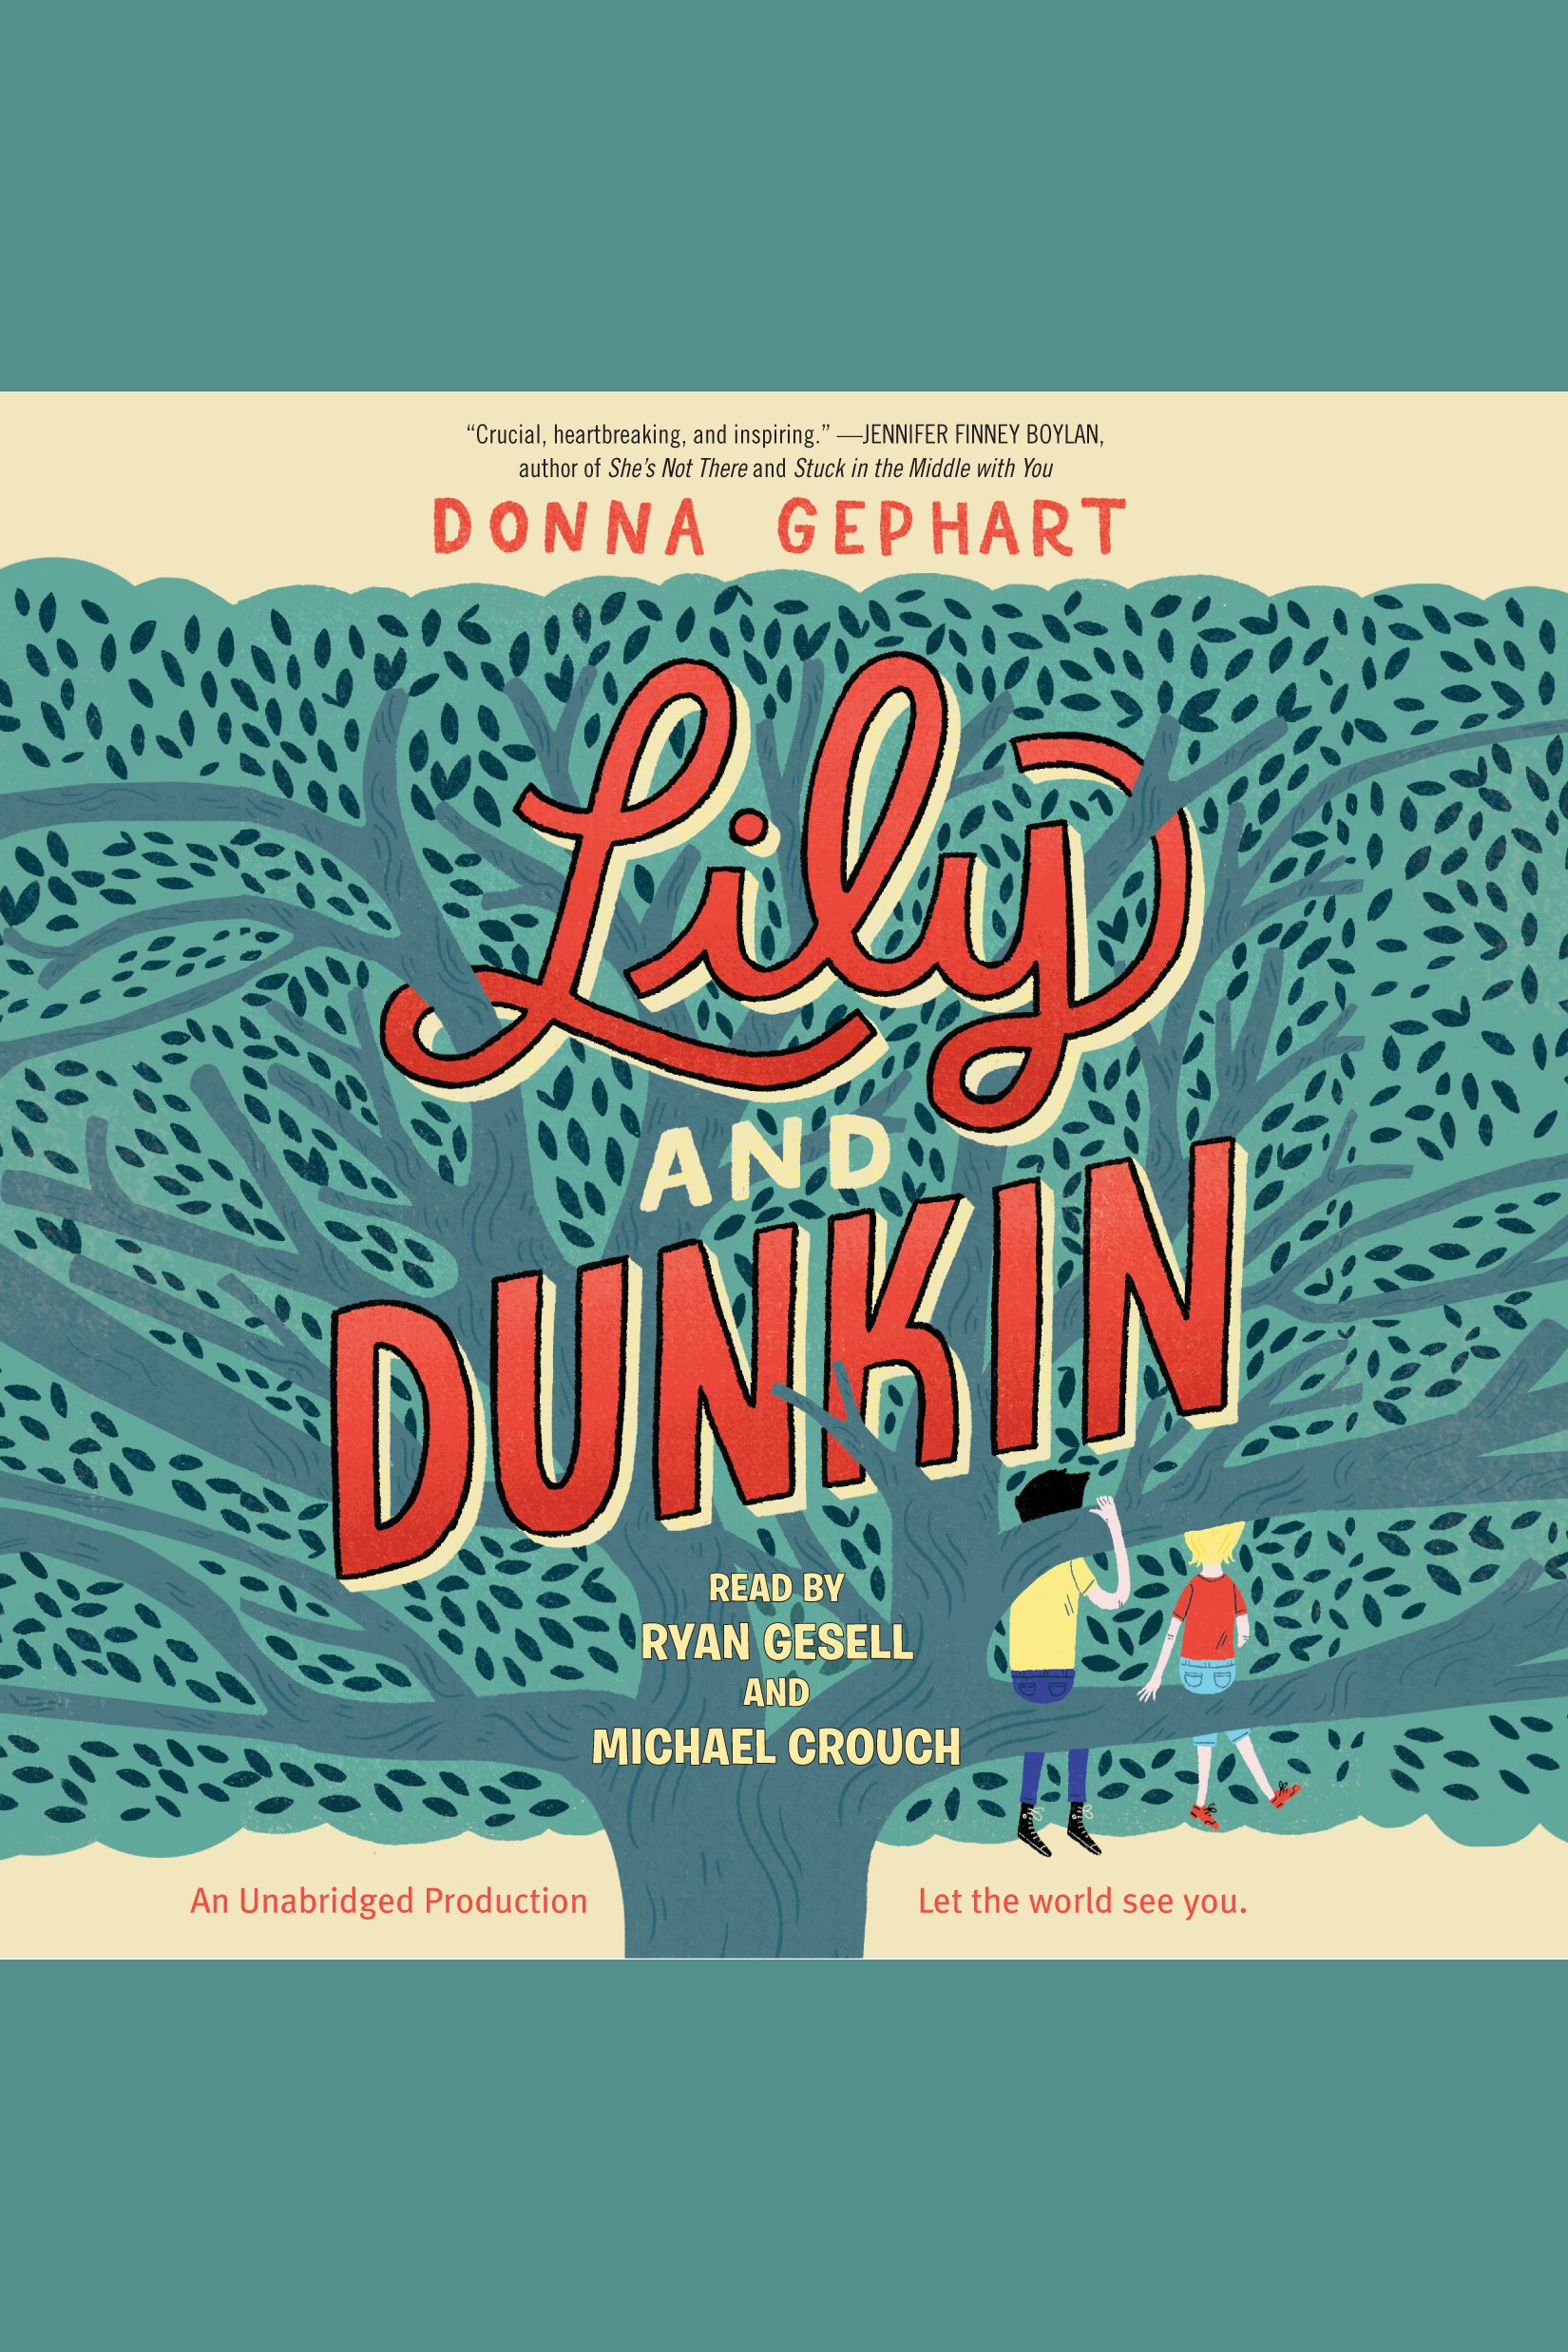 Lily and dunkin cover image